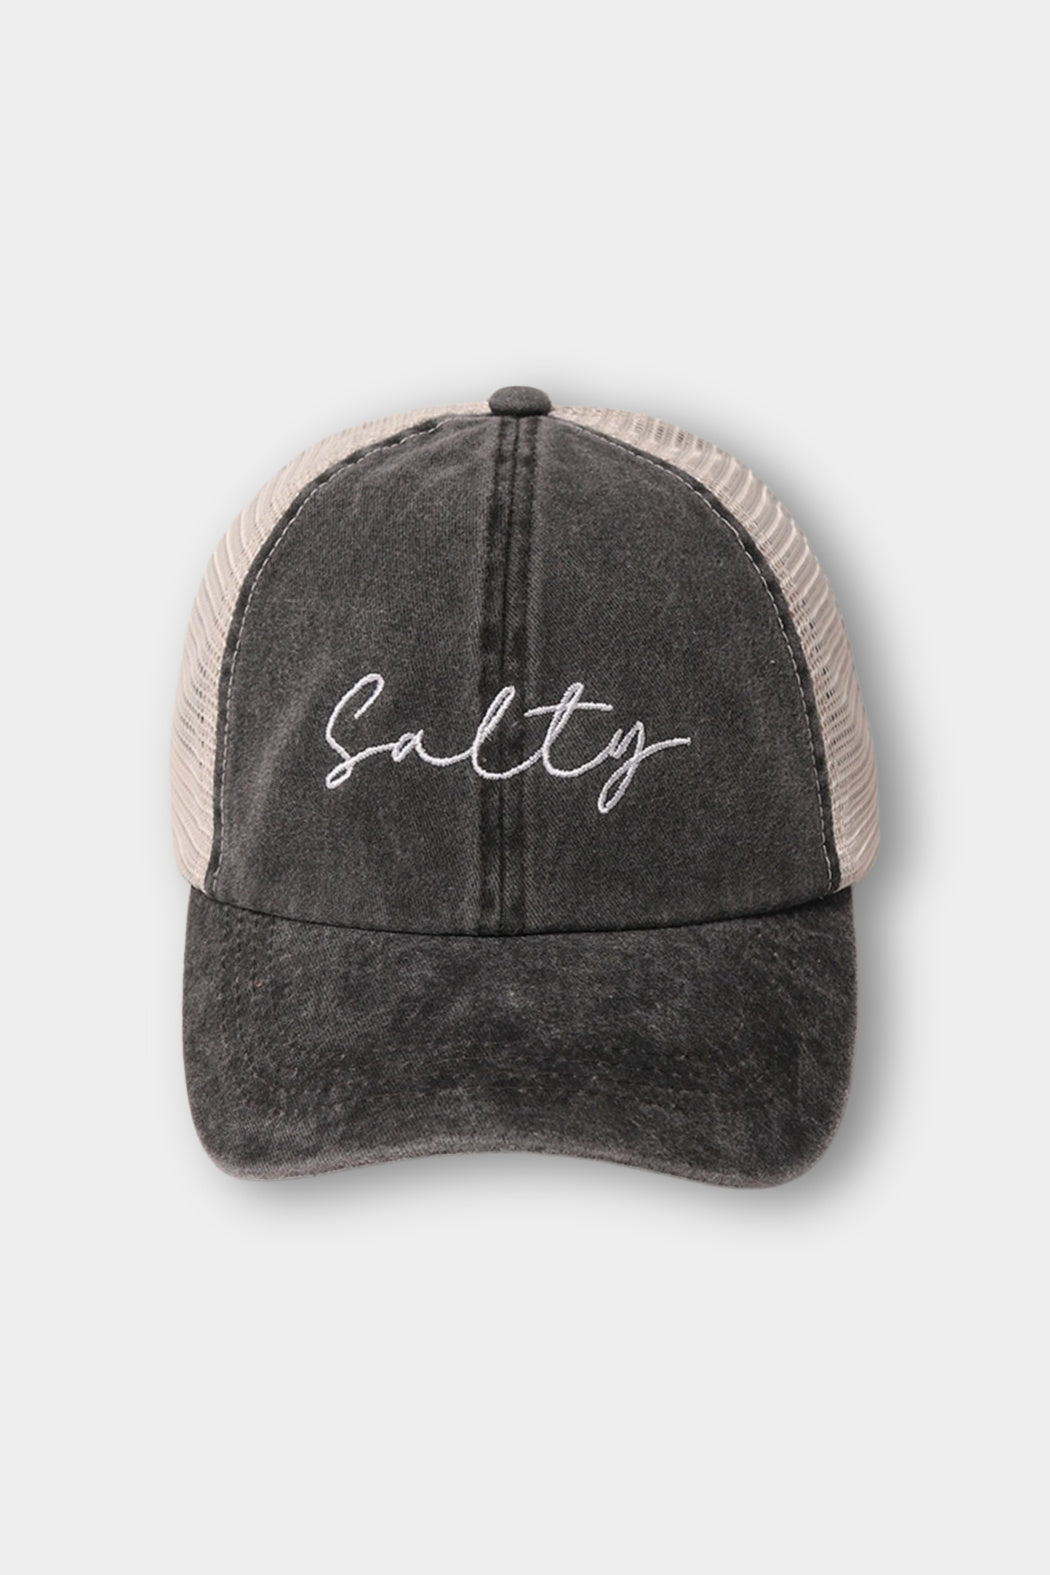 Salty Embroidered Mesh Cap